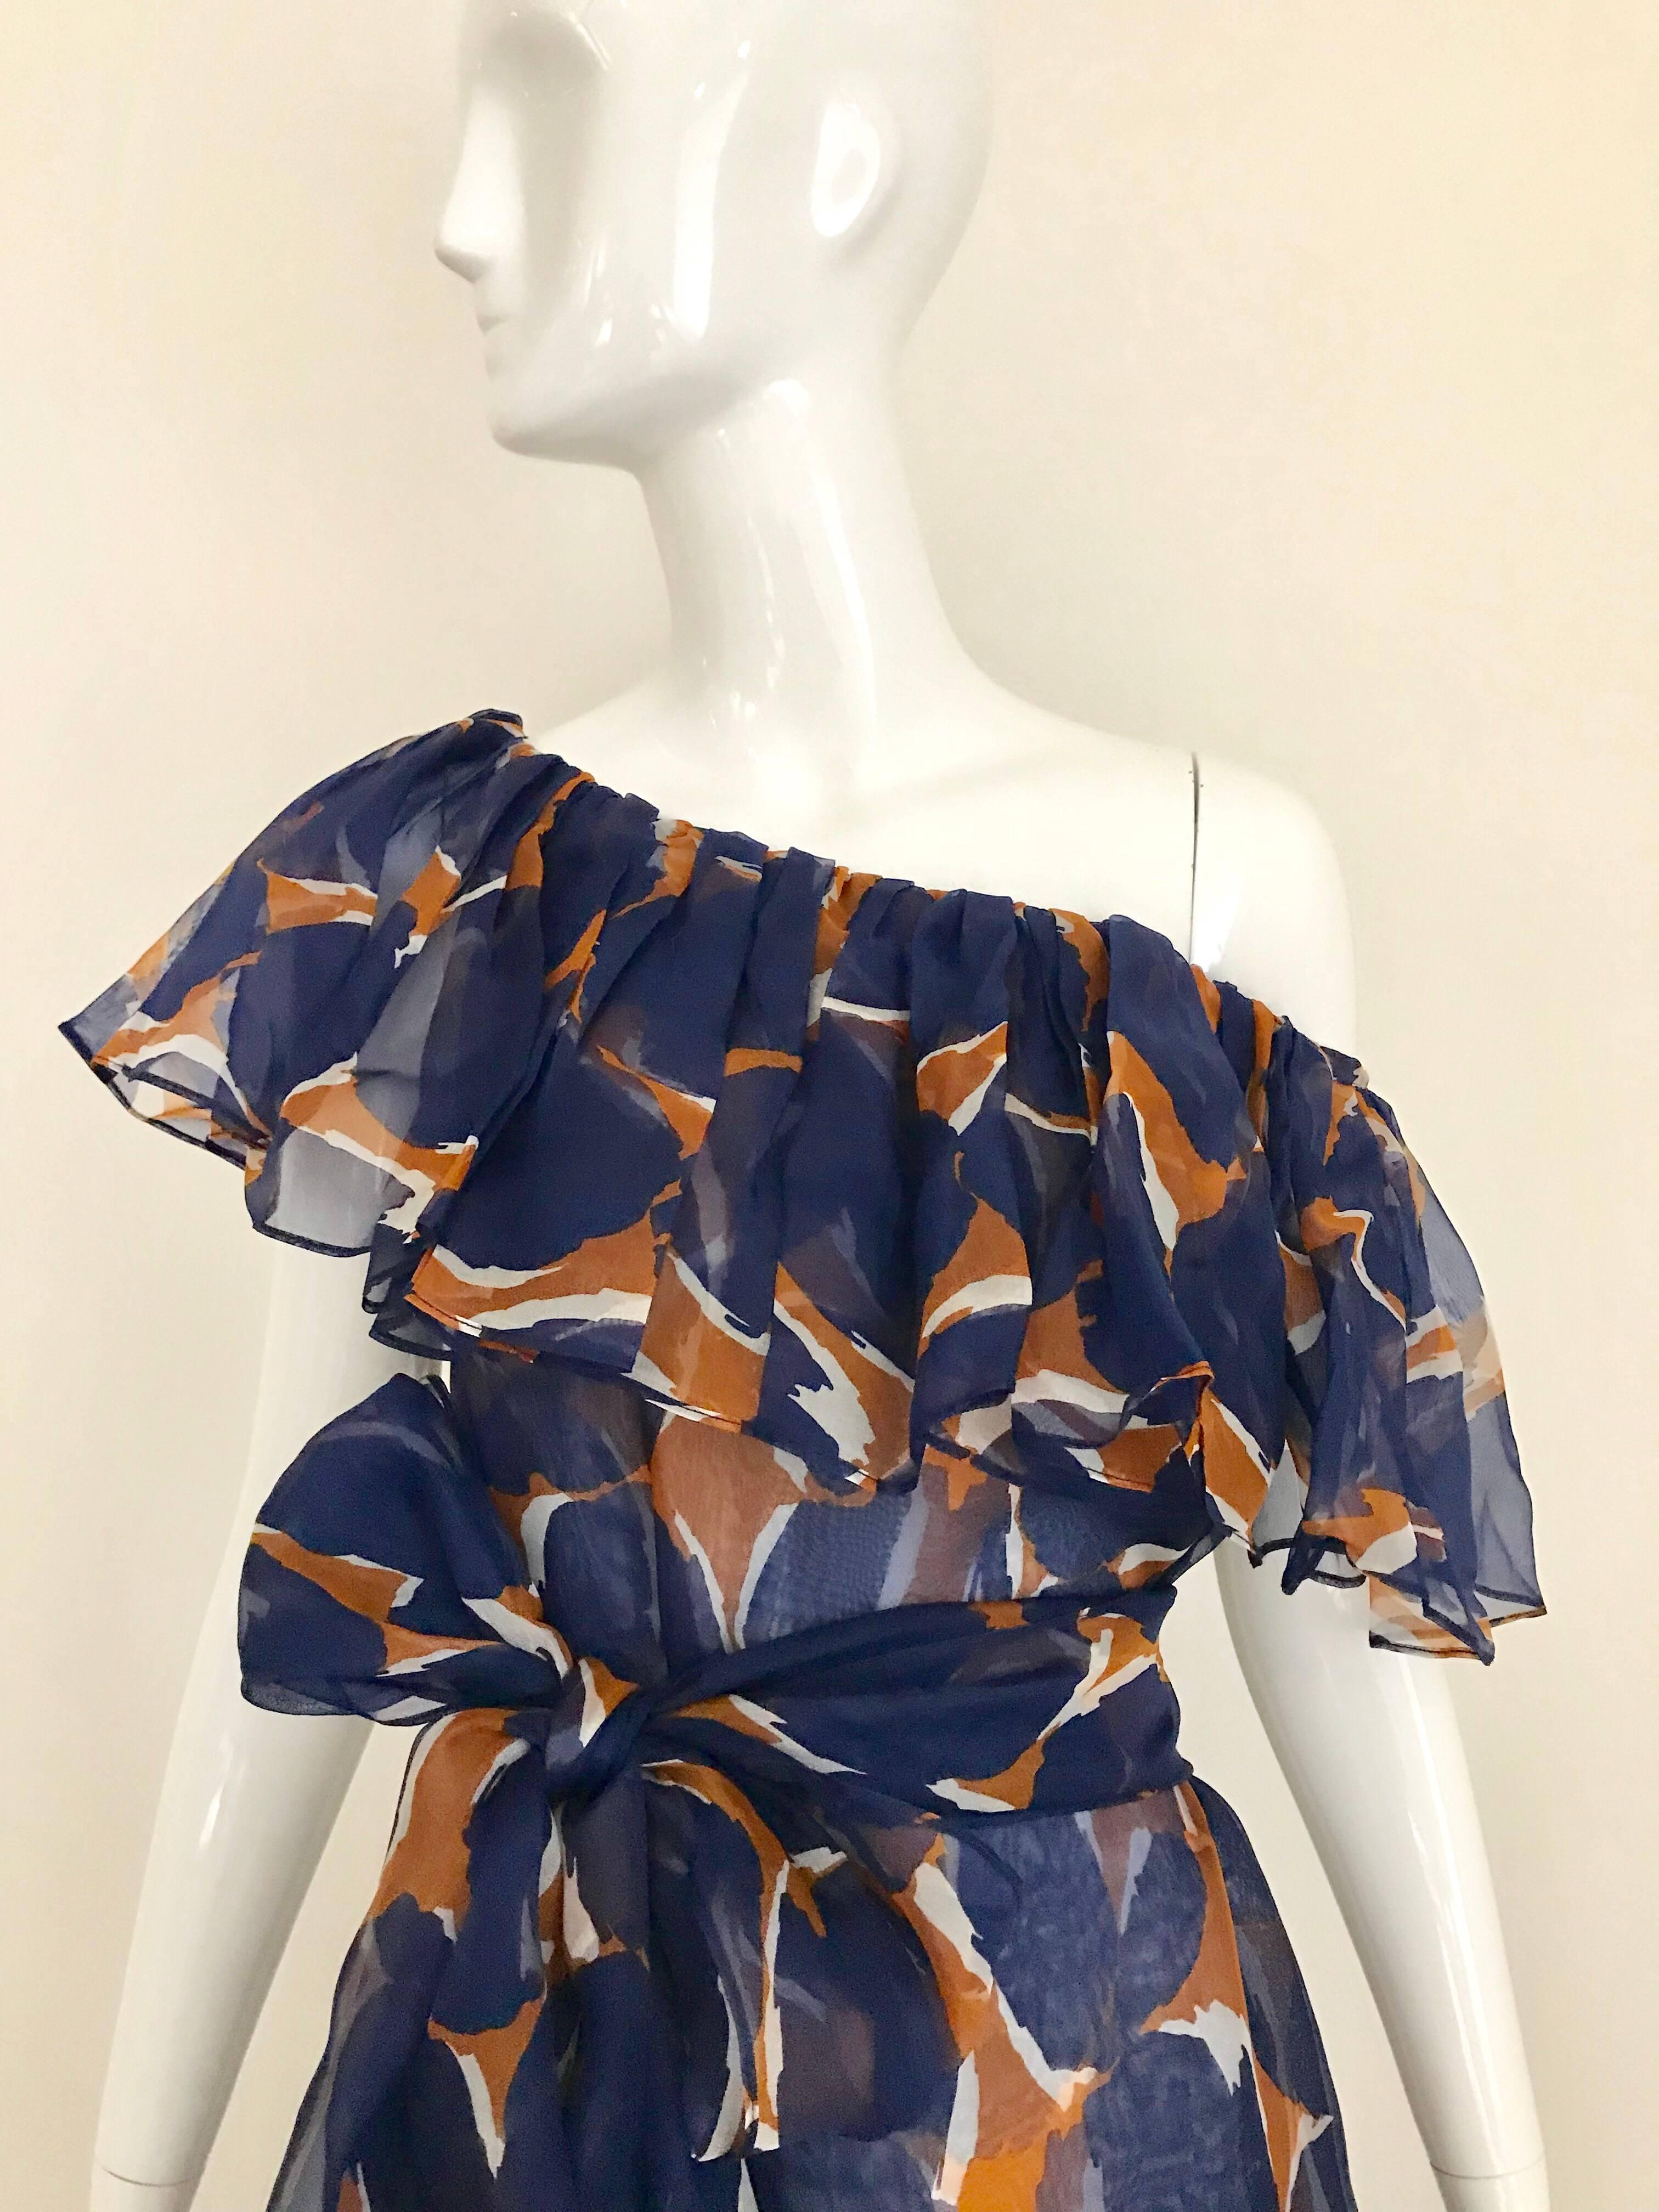 This late 80s  Saint Laurent rive gauche silk organza dress has the influence of a classic Flamenco dress but with much more subtle ruffles.
This print contains a blend of navy blue, light brown and white that creates a calm understated feel. The